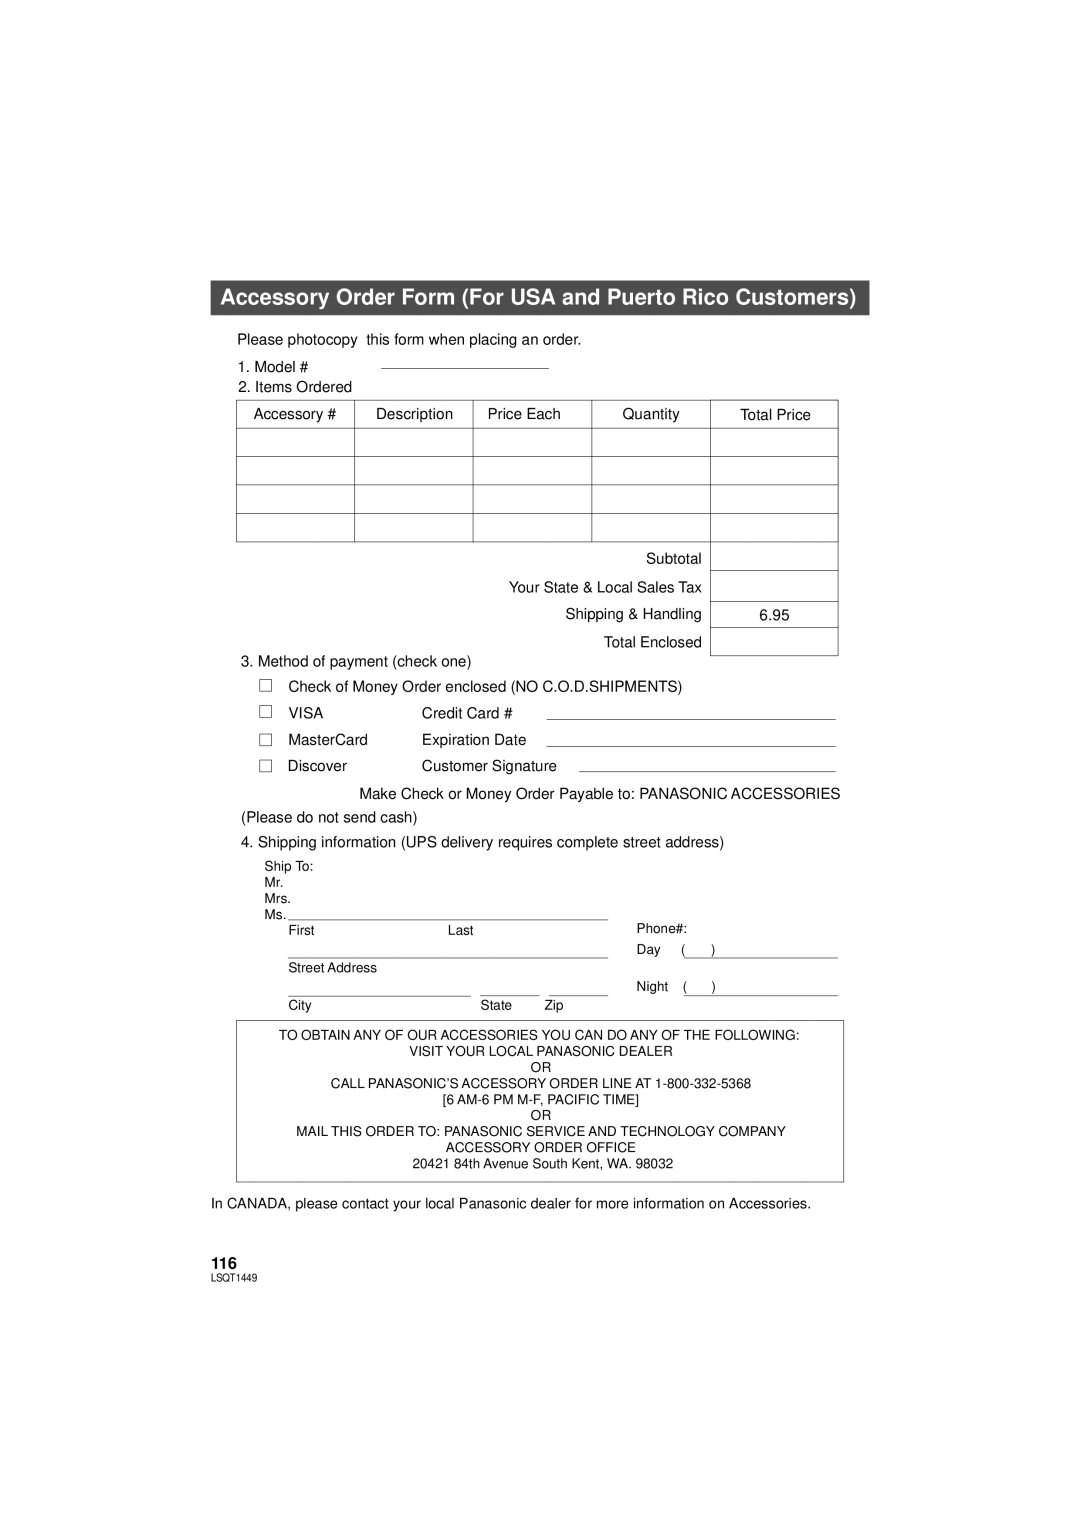 Panasonic SDR-H90PC, SDR-H80PC operating instructions Accessory Order Form For USA and Puerto Rico Customers 